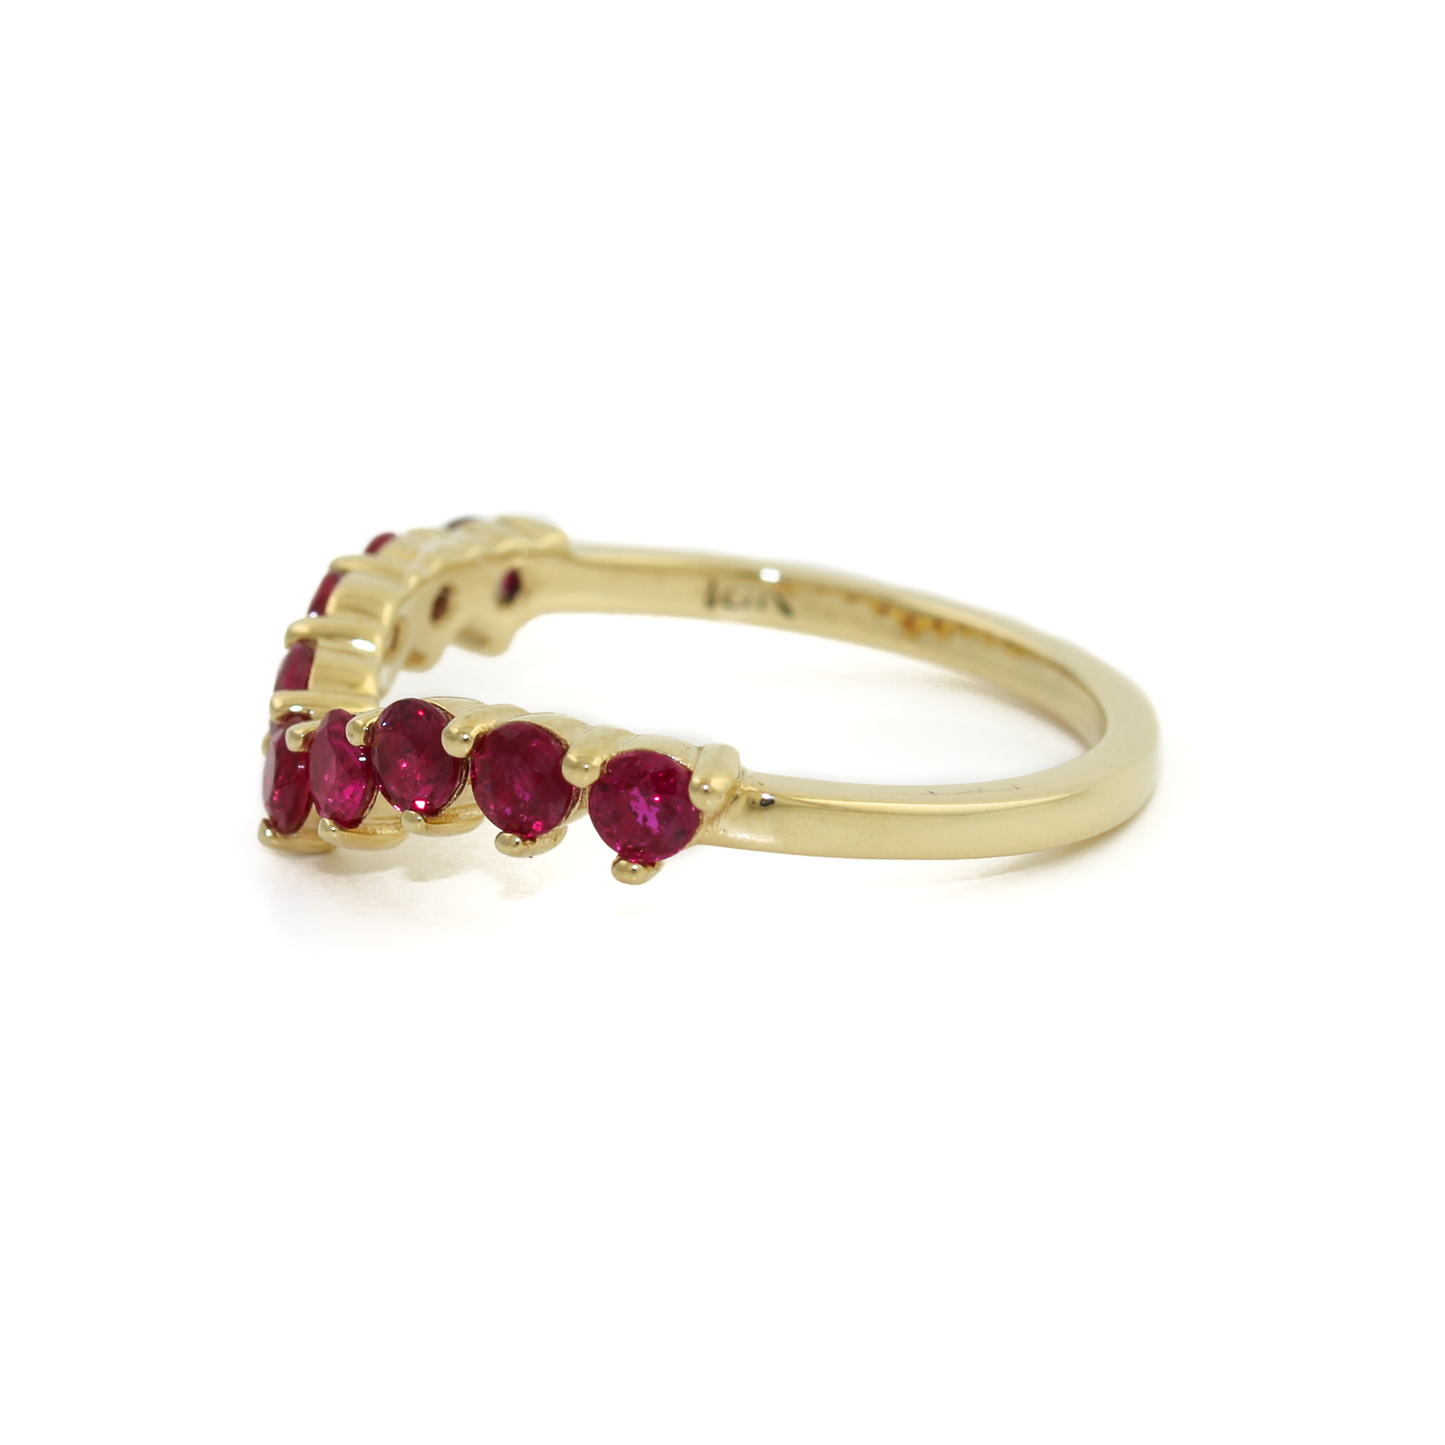 A gorgeous band comprised of 9 round cut rubies, aligned in a chic tiara shaped setting. Set in 14k yellow gold, the vibrant rubies truly pop. Each Ruby is set with a prong bezel allowing you to see each stone in full dimension. All together the elements work beautifully as the crowning jewel band to your existing set, or a modern standalone piece. This isn't your run of the mill stacking band!   Made by Kingdom Jewelry using Rubies and 14k Yellow Gold